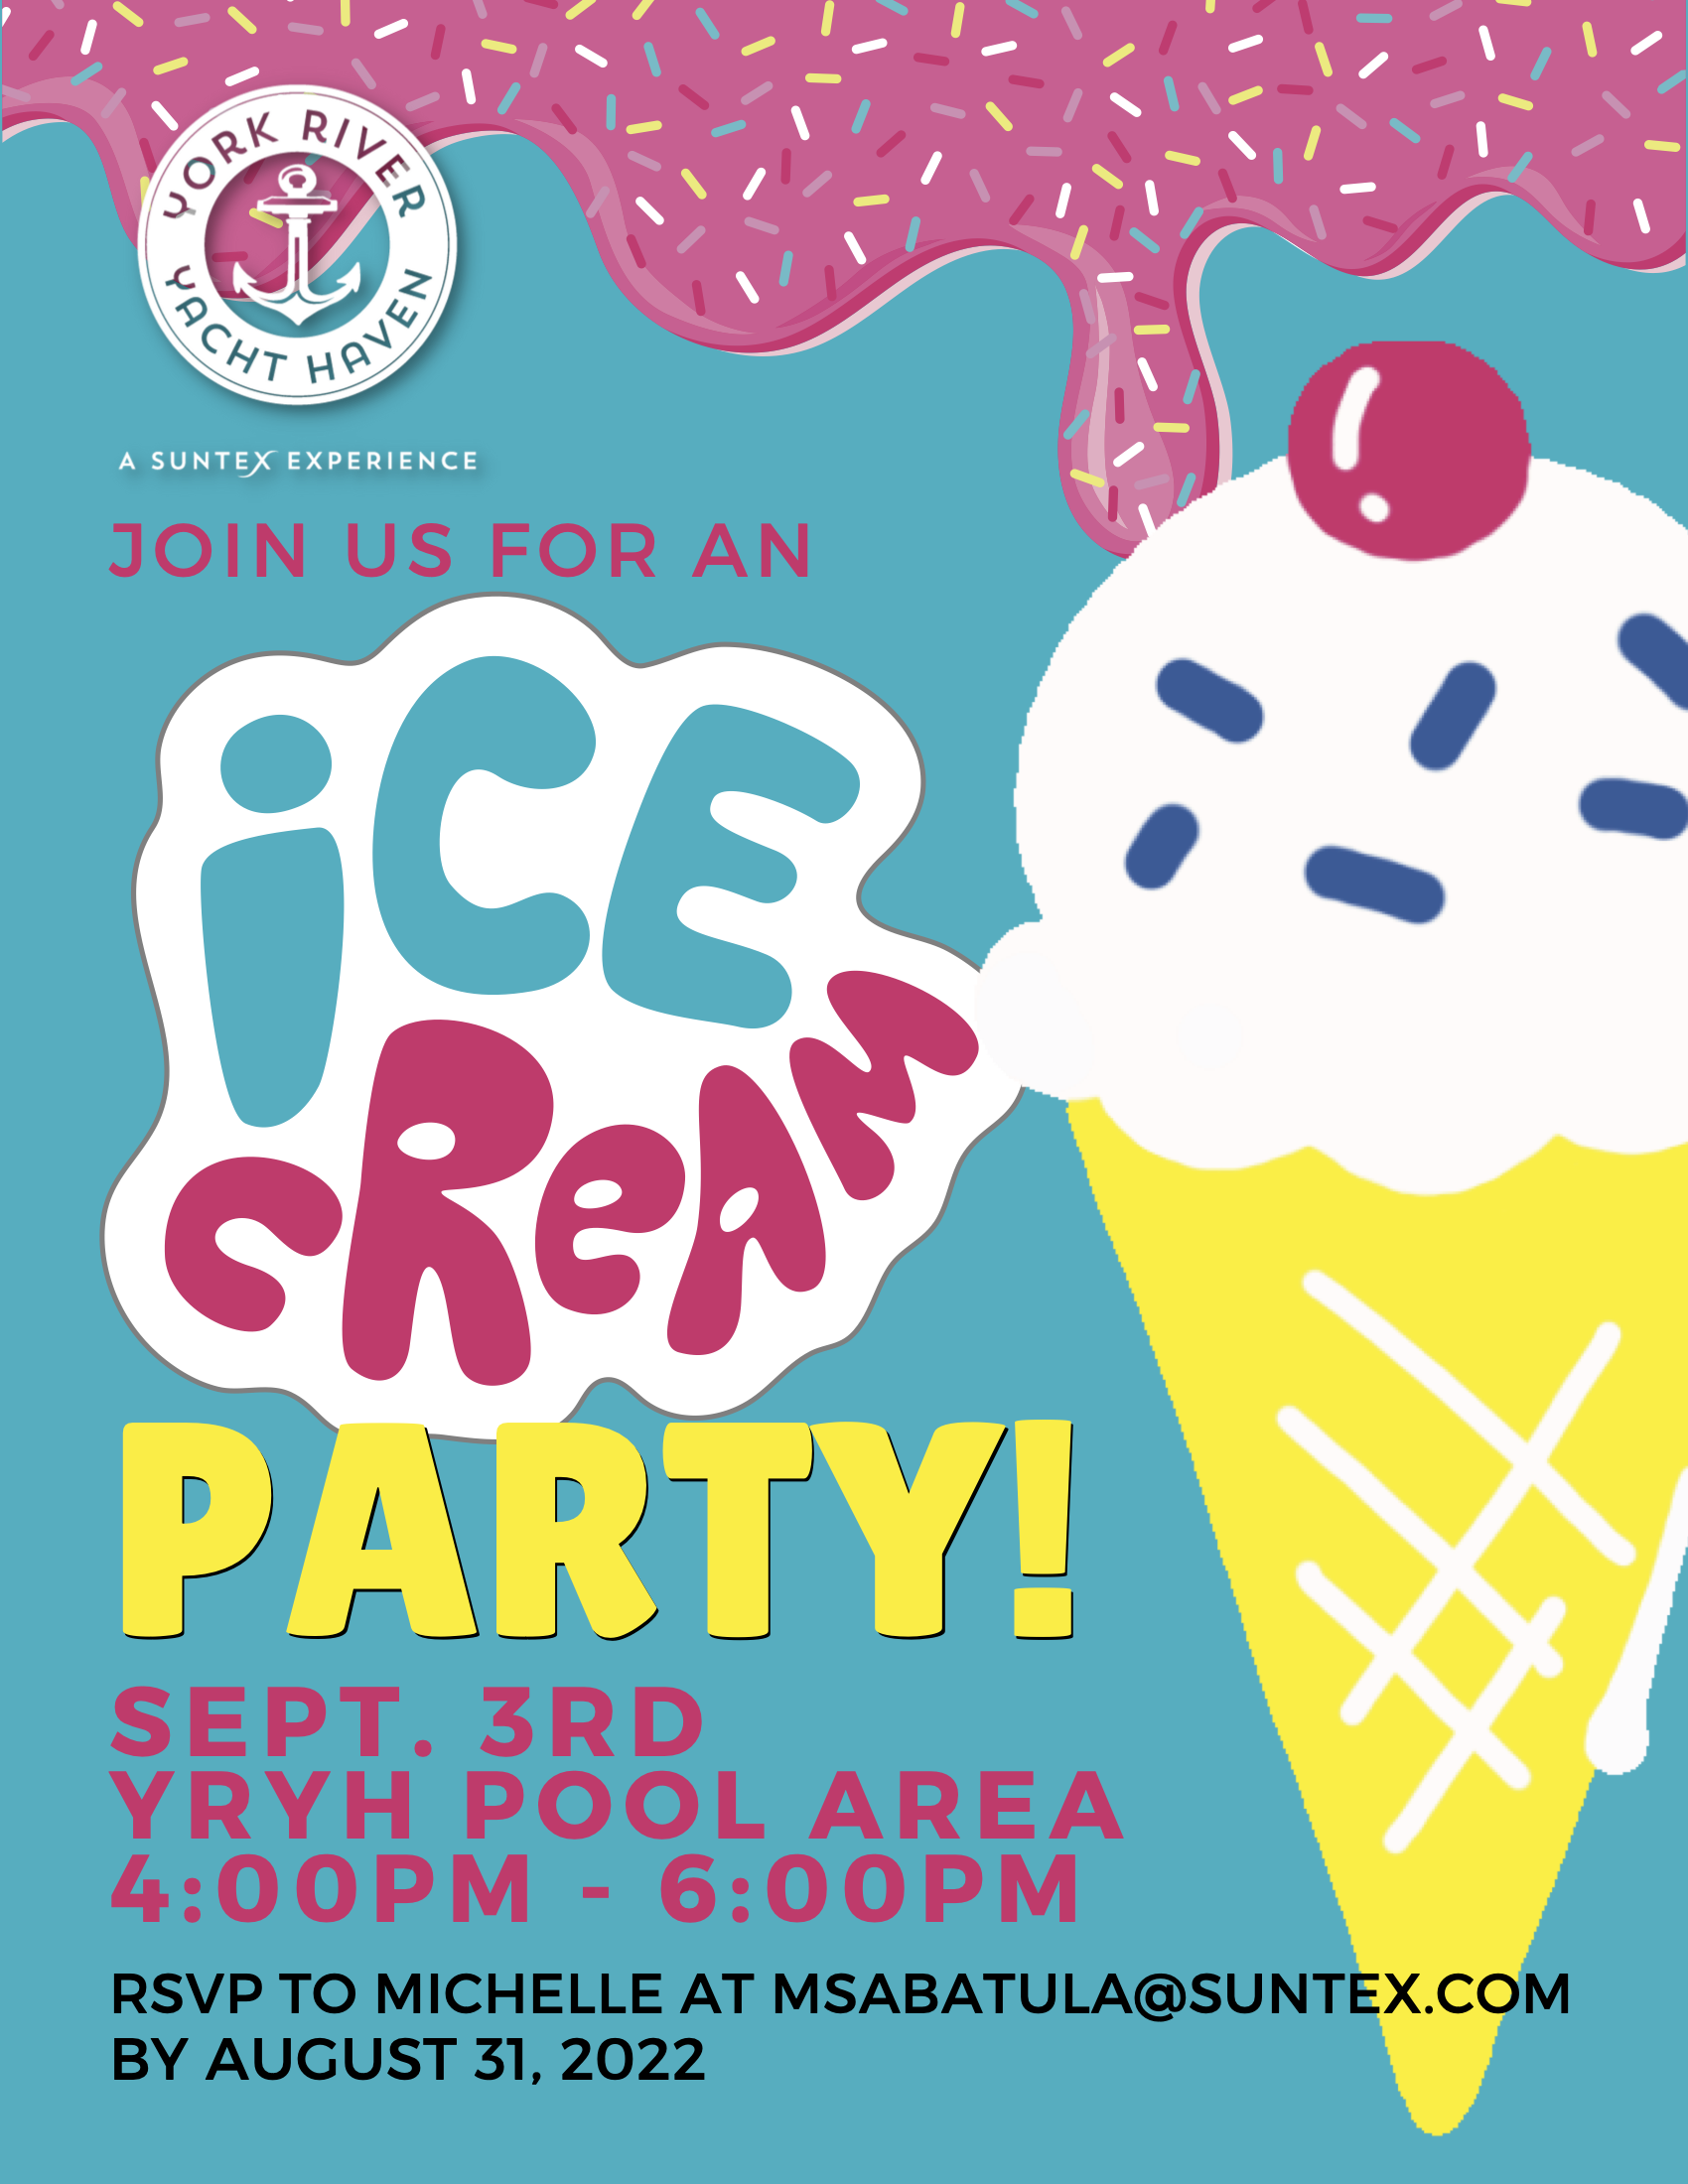 Ice Cream Party at York River Yacht Haven | Gloucester, Virginia